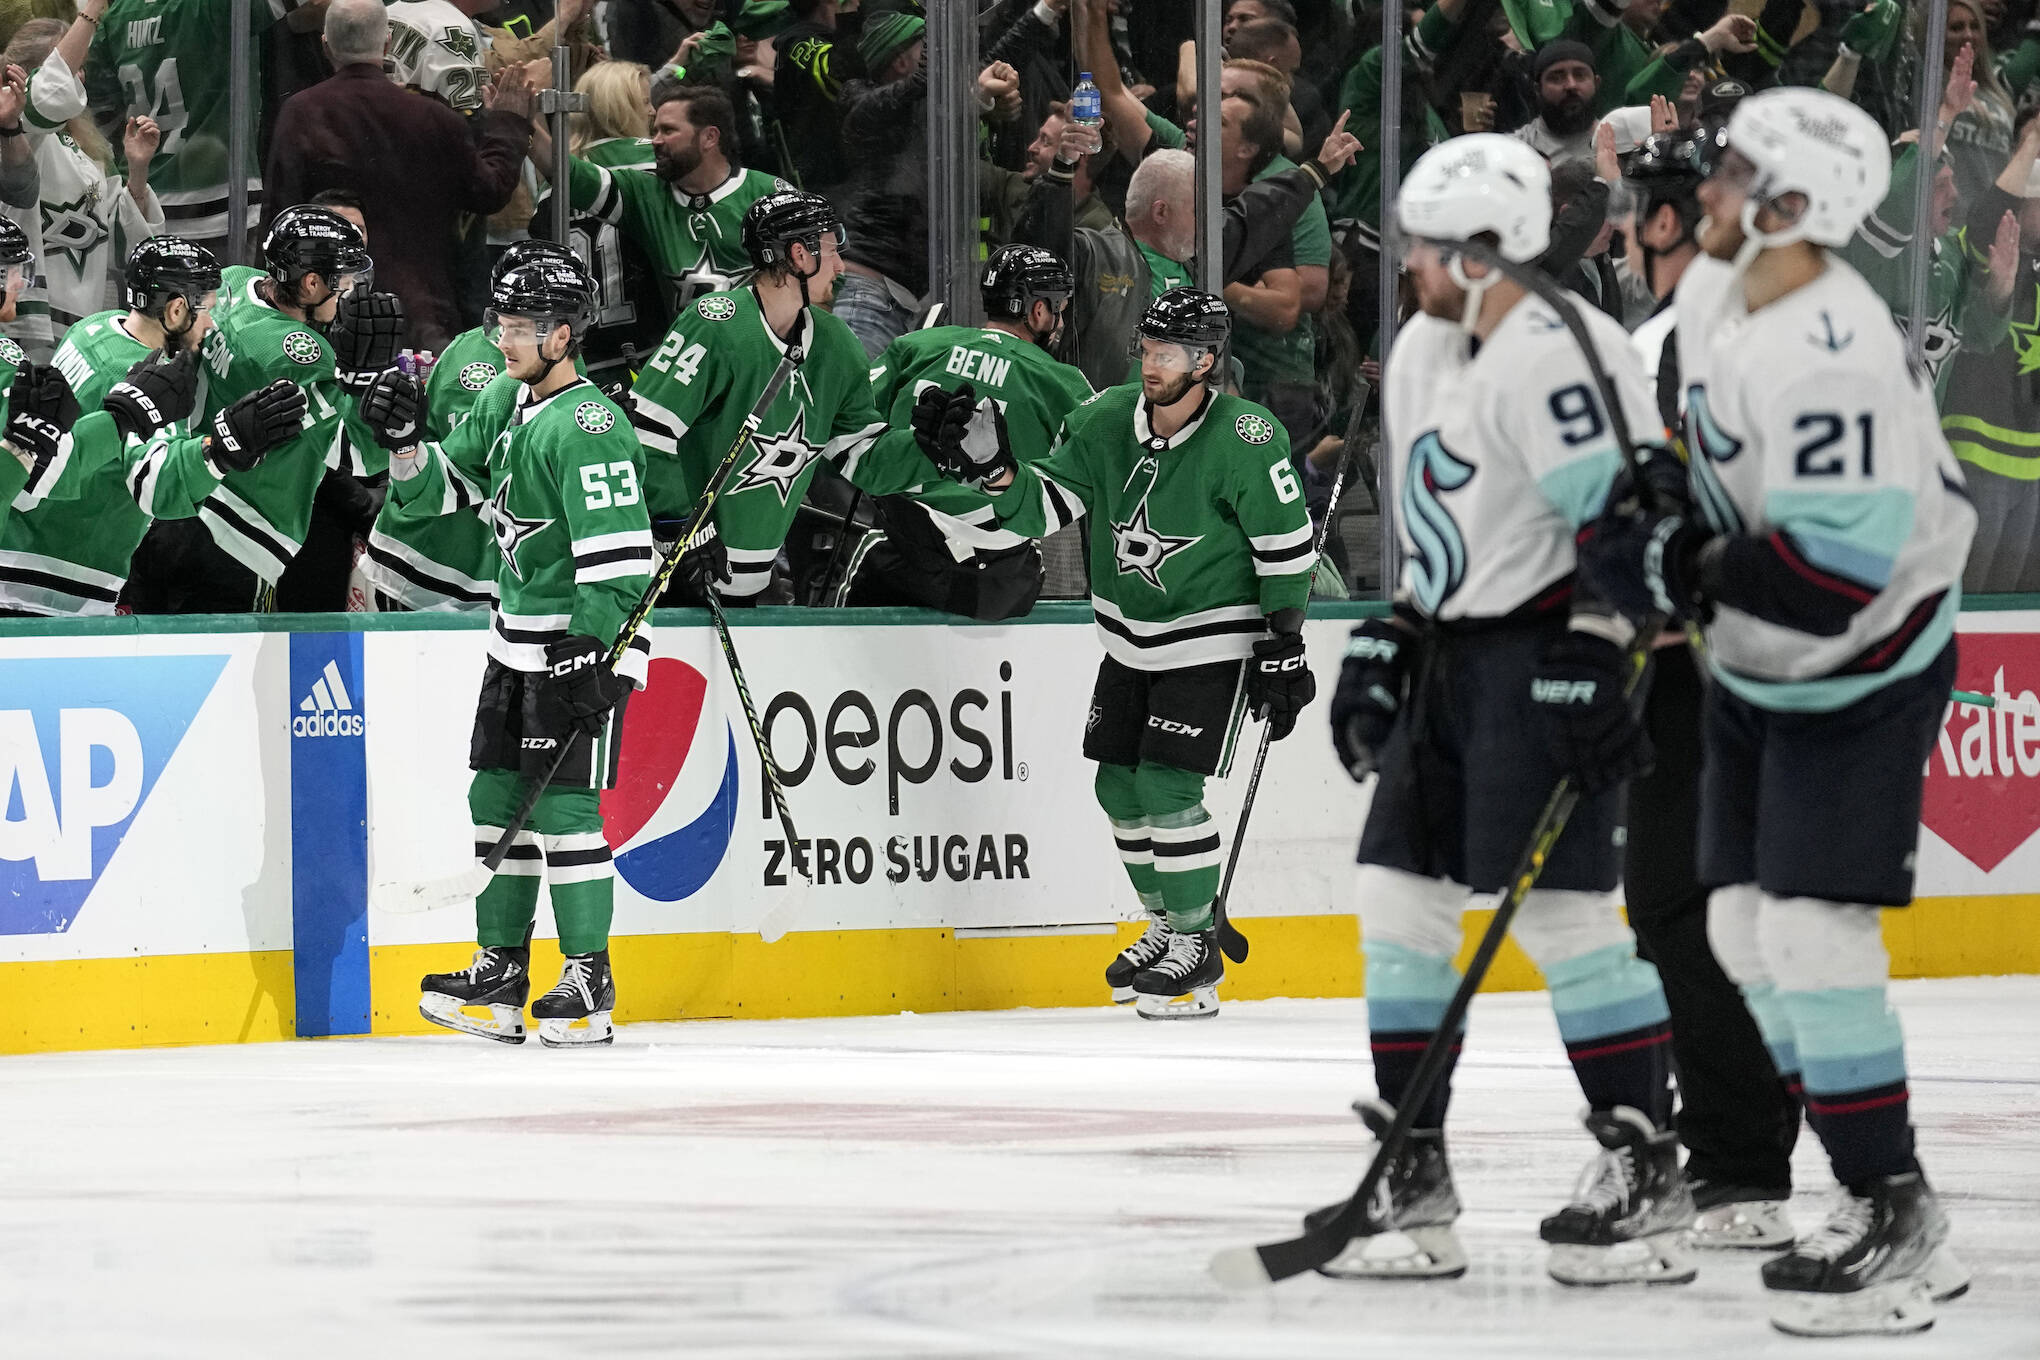 The Stars’ Wyatt Johnston (53) and Colin Miller (6) celebrate with the bench after Johnston scored as the Kraken’s Ryan Donato (9) and Alex Wennberg (21) skate past in the second period of Game 2 of second-round playoff series Thursday in Dallas. (AP Photo/Tony Gutierrez)